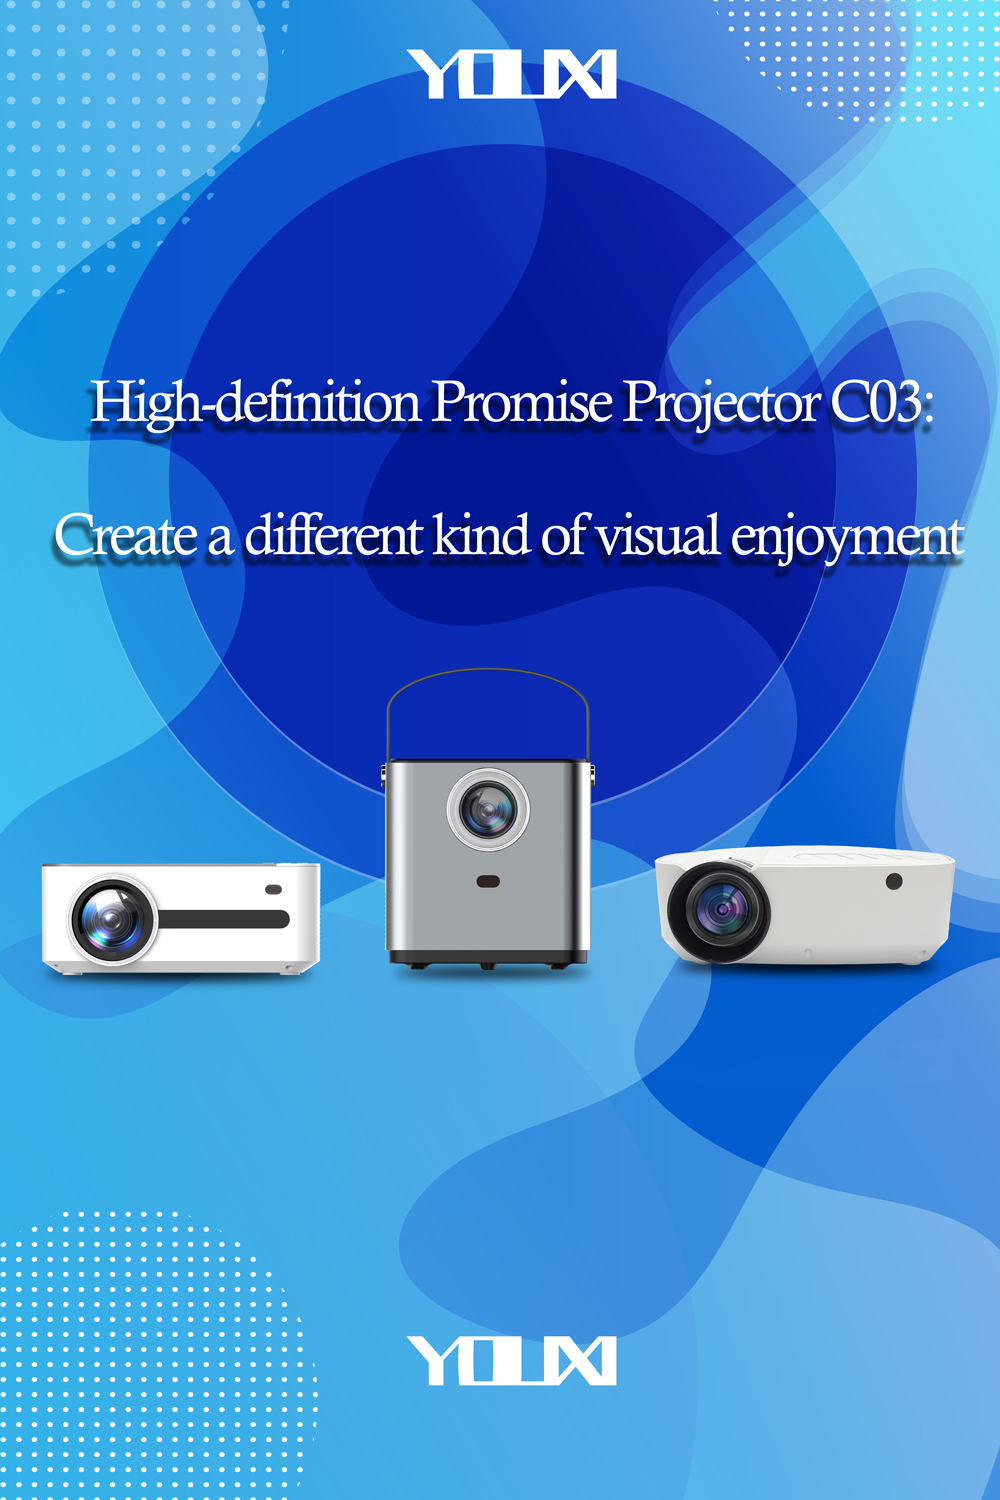 High-definition Promise Projector C03: Create a different kind of visual enjoyment